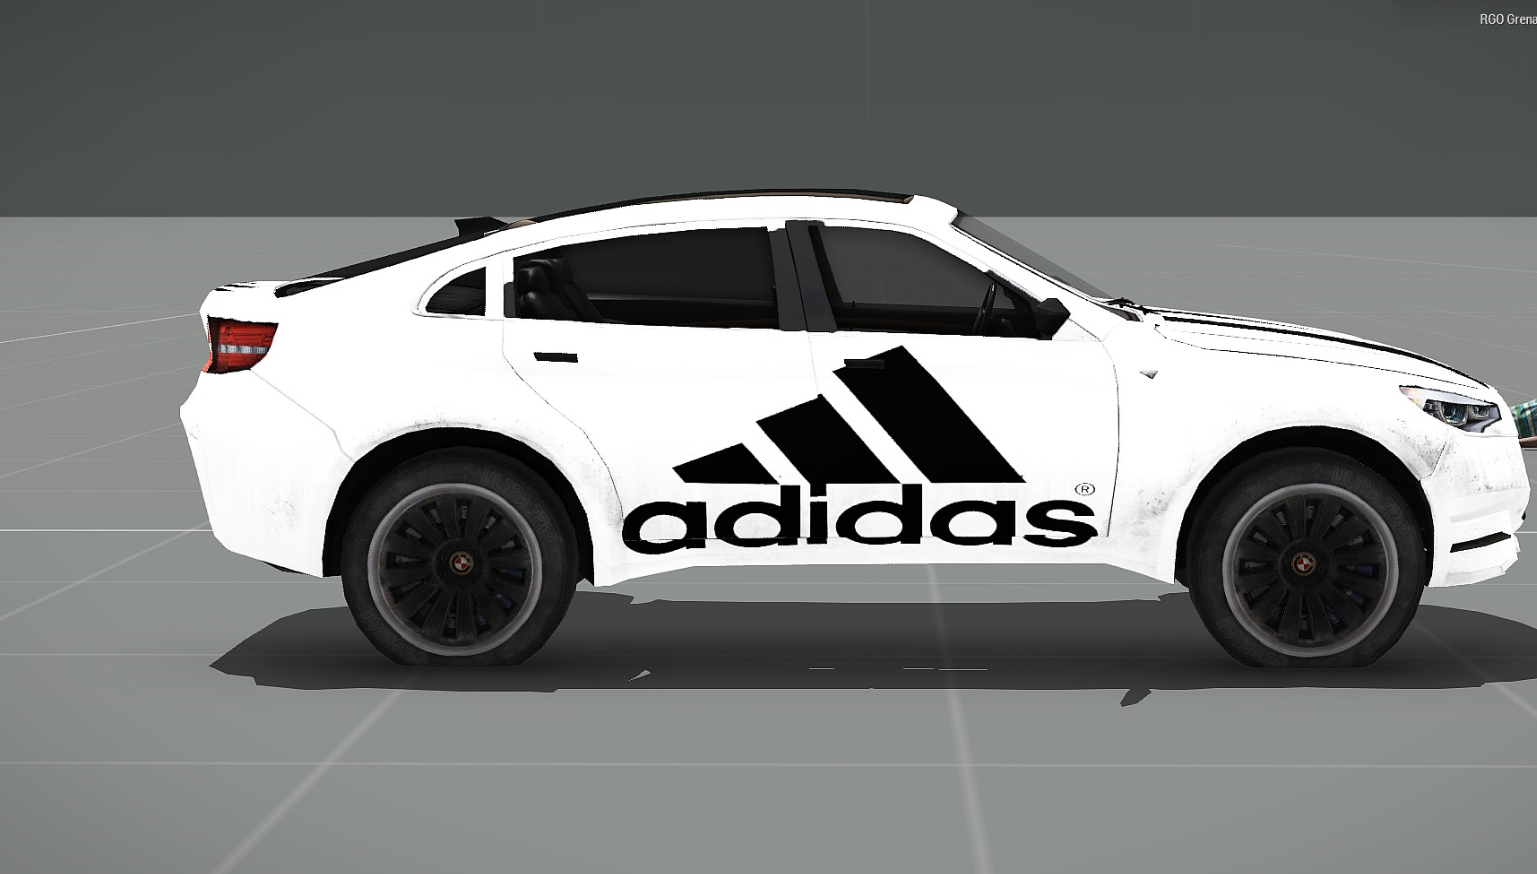 archived] Adidas car - Archive - Grand ArmA Altis Life